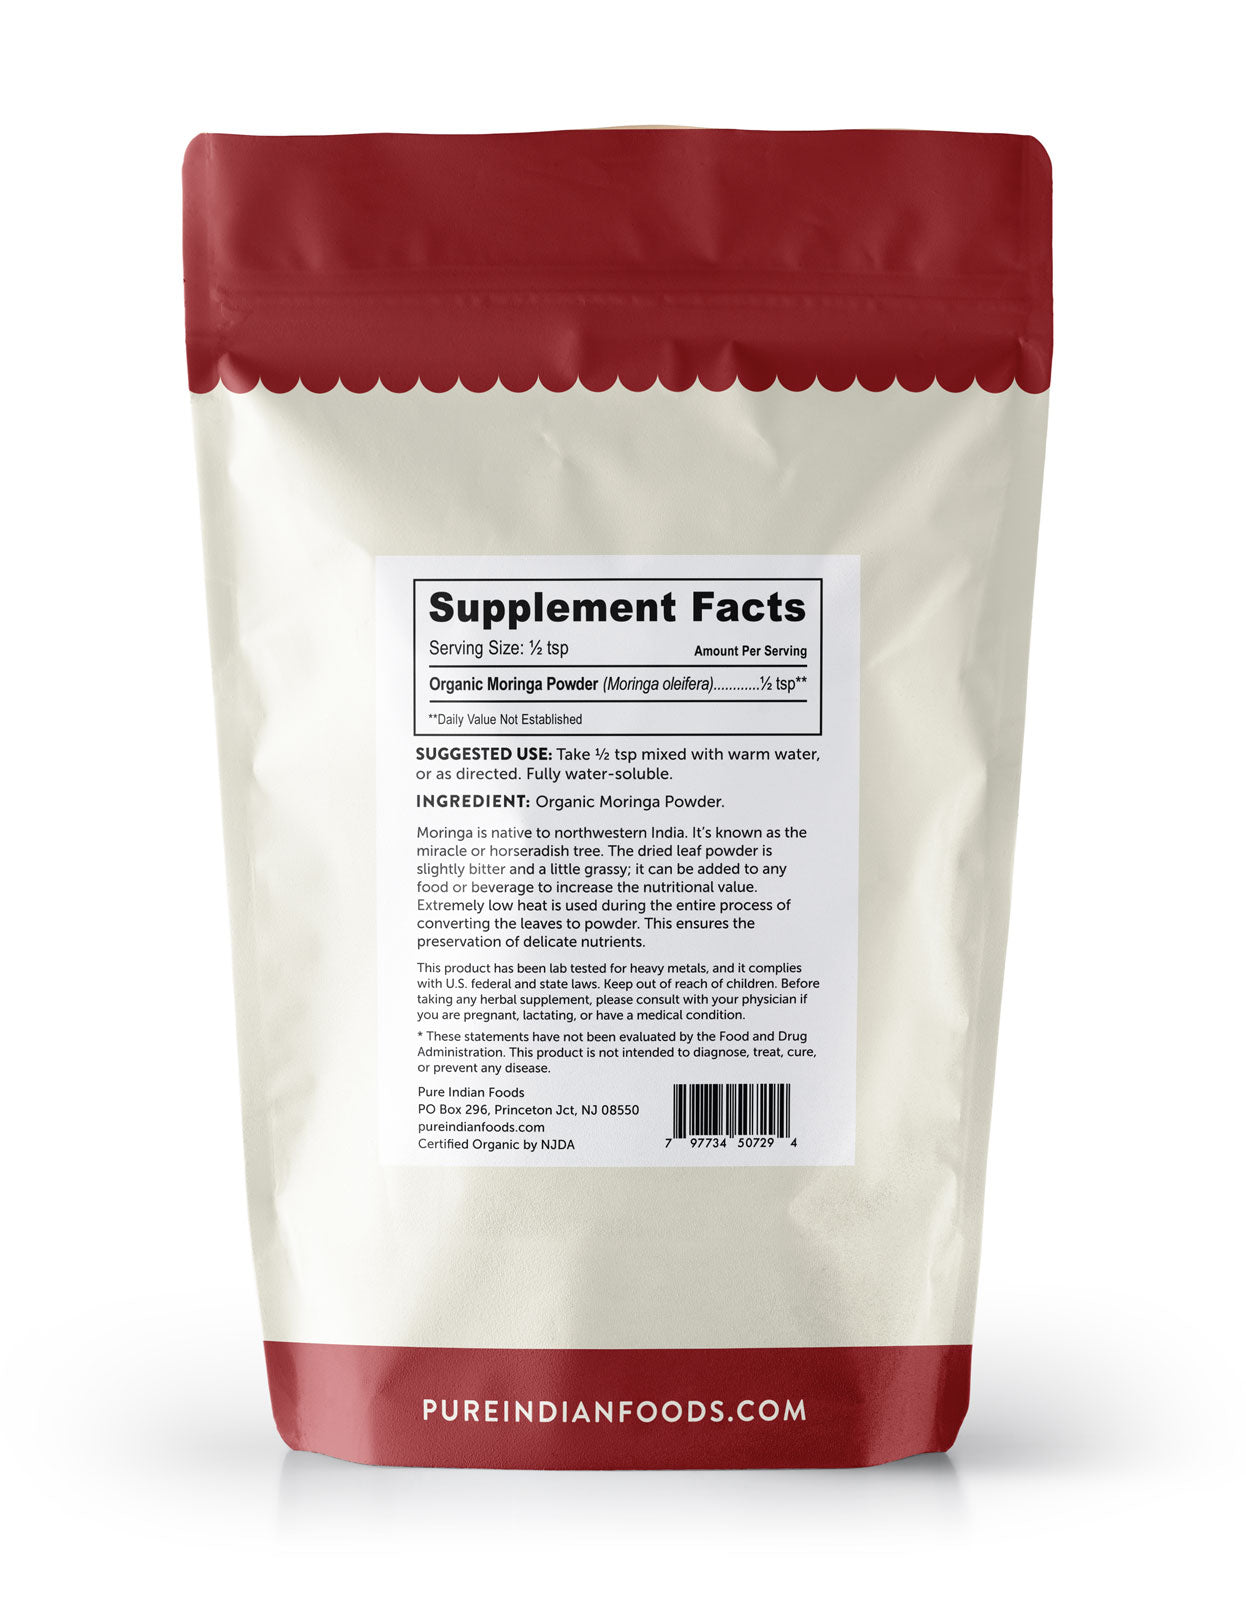 Supplement Facts and Ingredients label on a bag of Organic Moringa from Pure Indian Foods